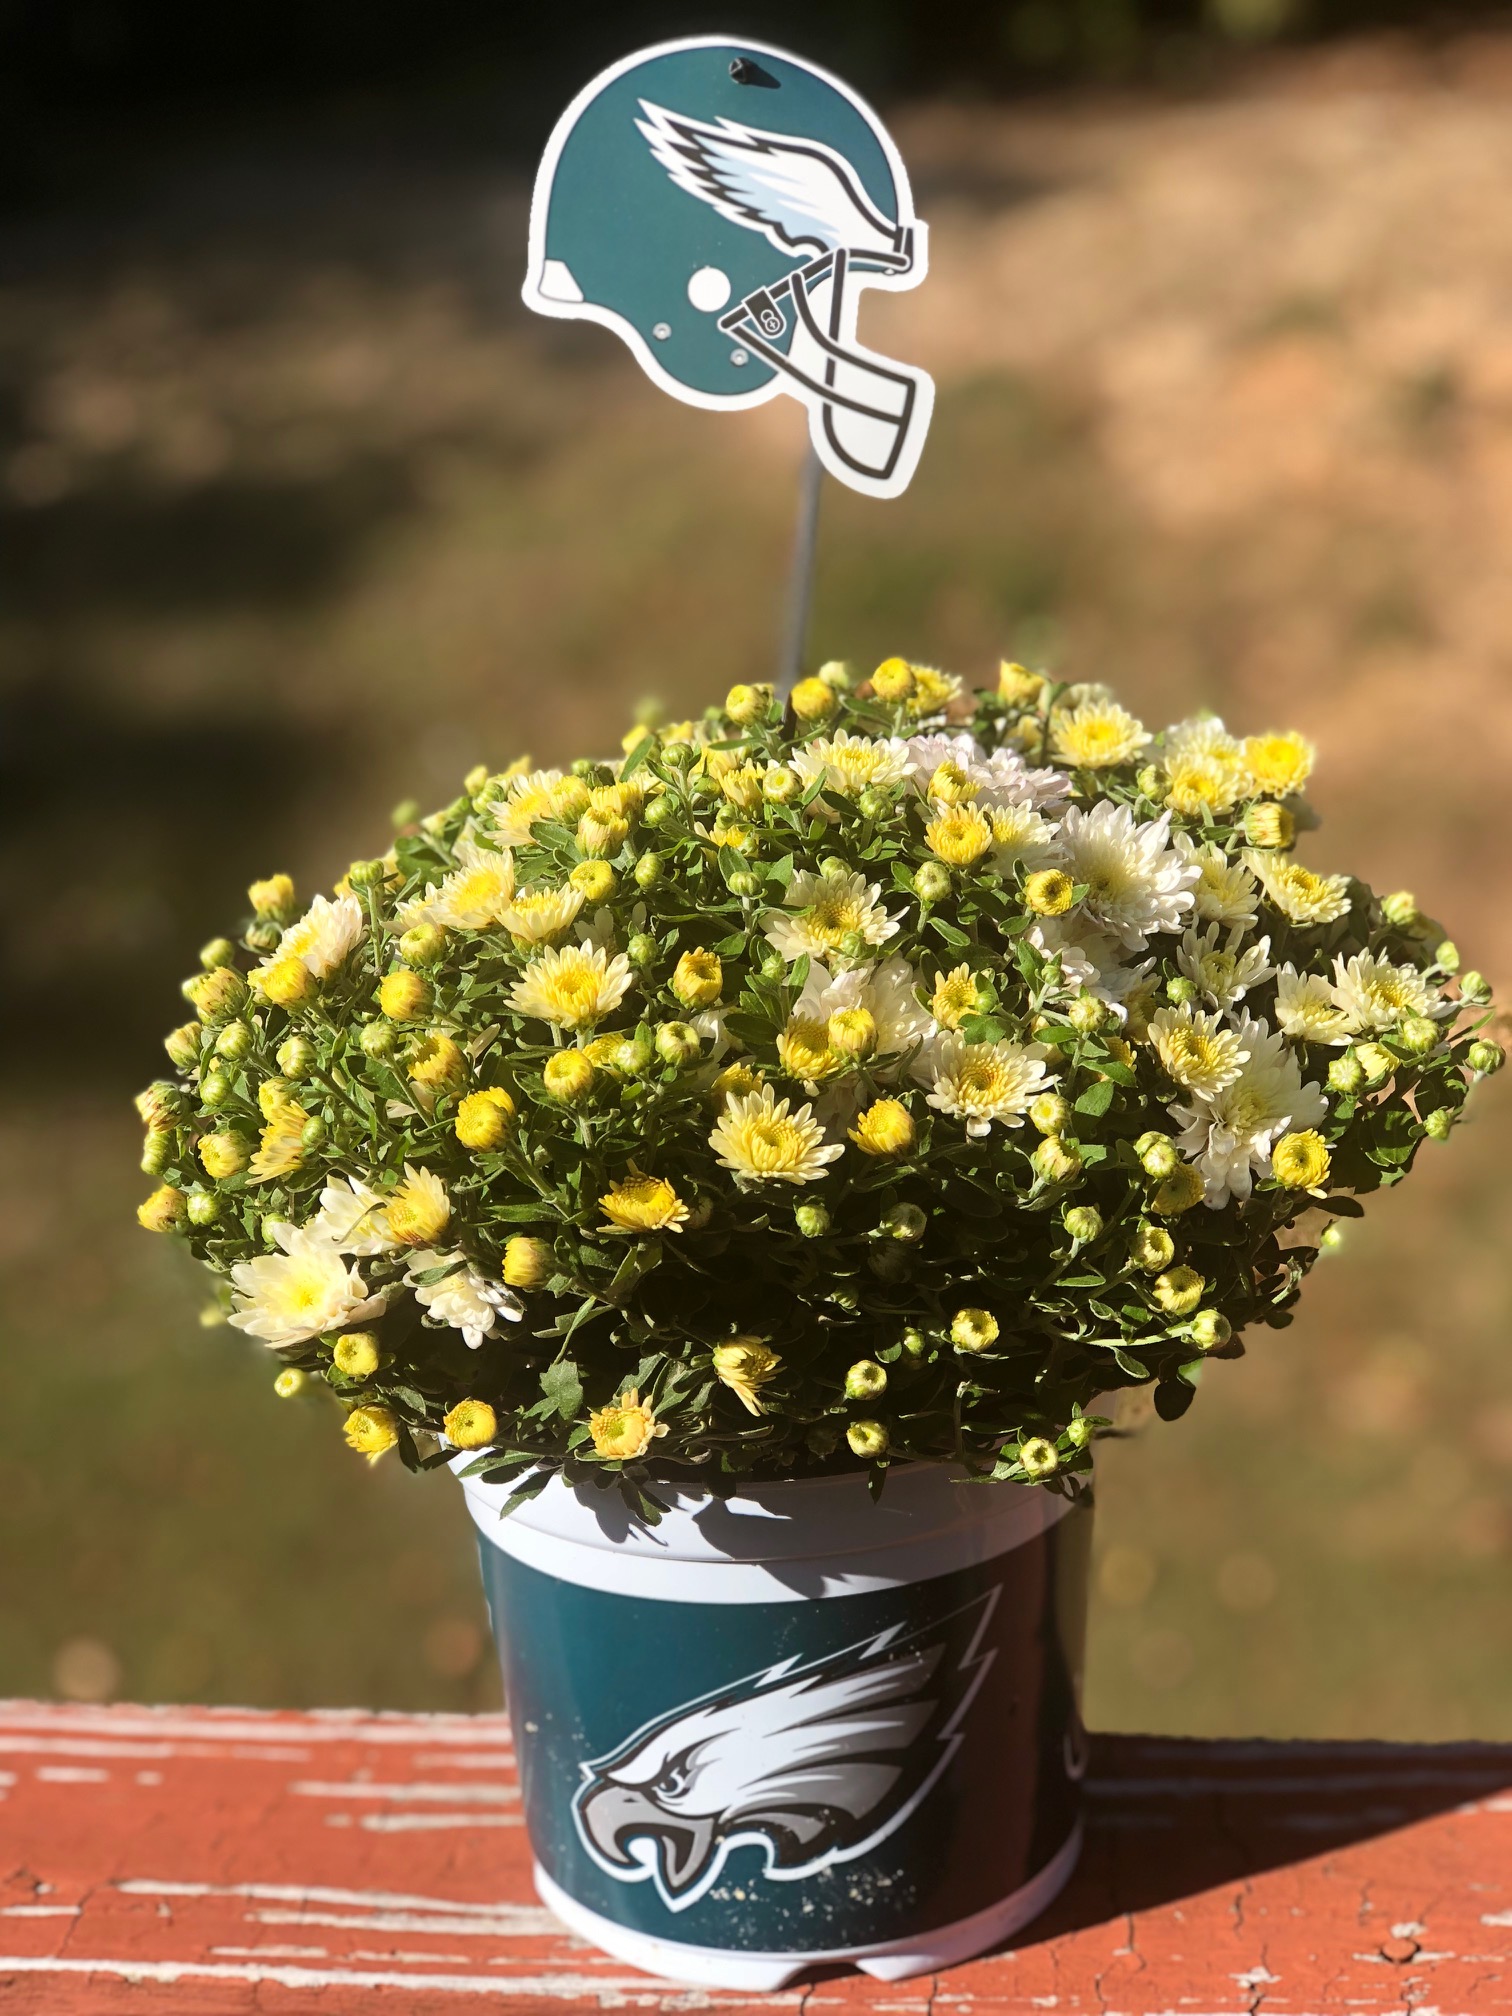 Peep The Amazing Sports Themed Flowers